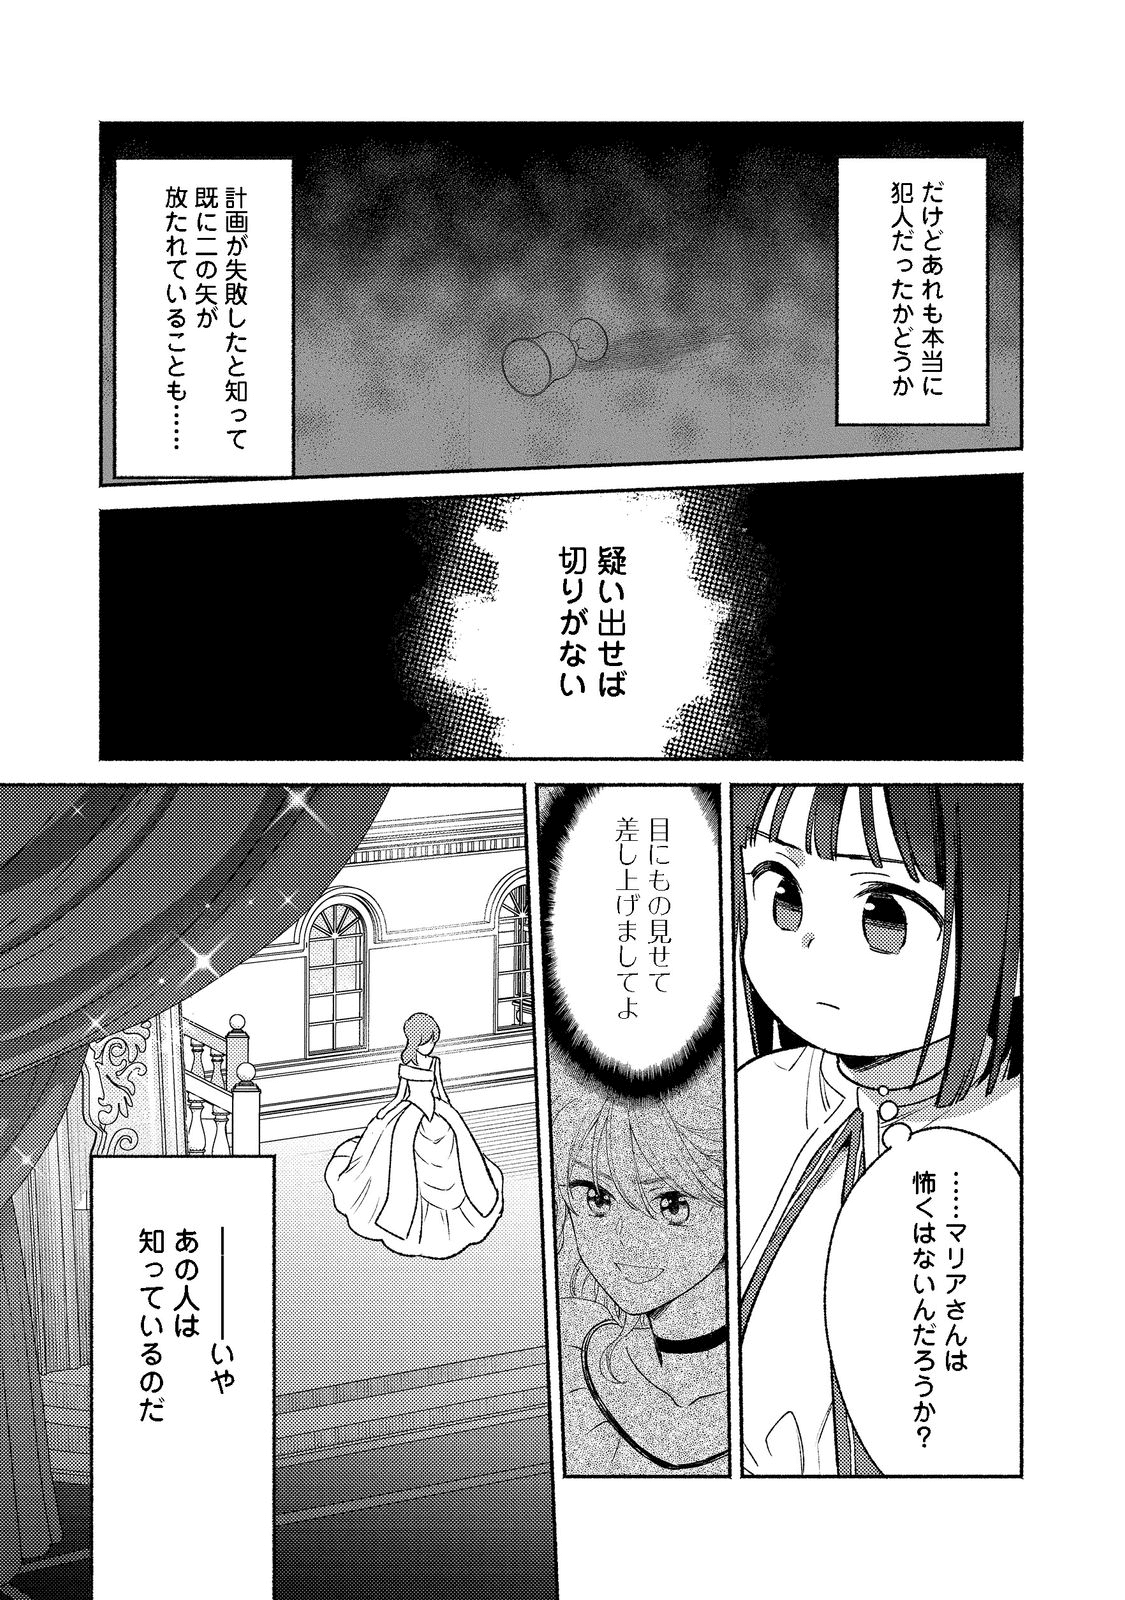 I’m the White Pig Nobleman 第15.2話 - Page 13